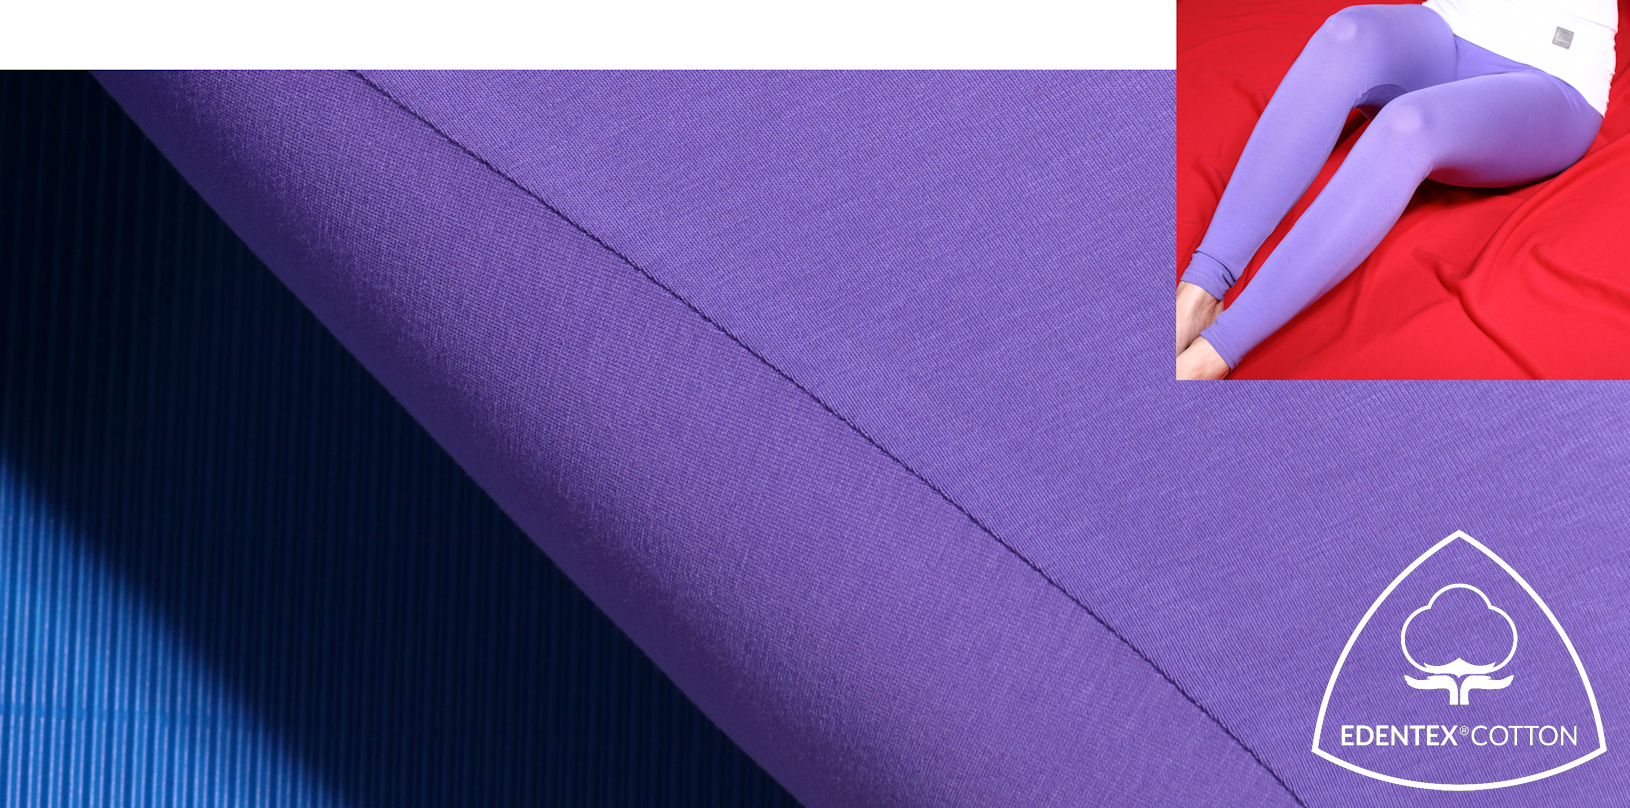 With advanced technology of production and carefully selected fiber, high quality EDENTEX®COTTON yarn was created